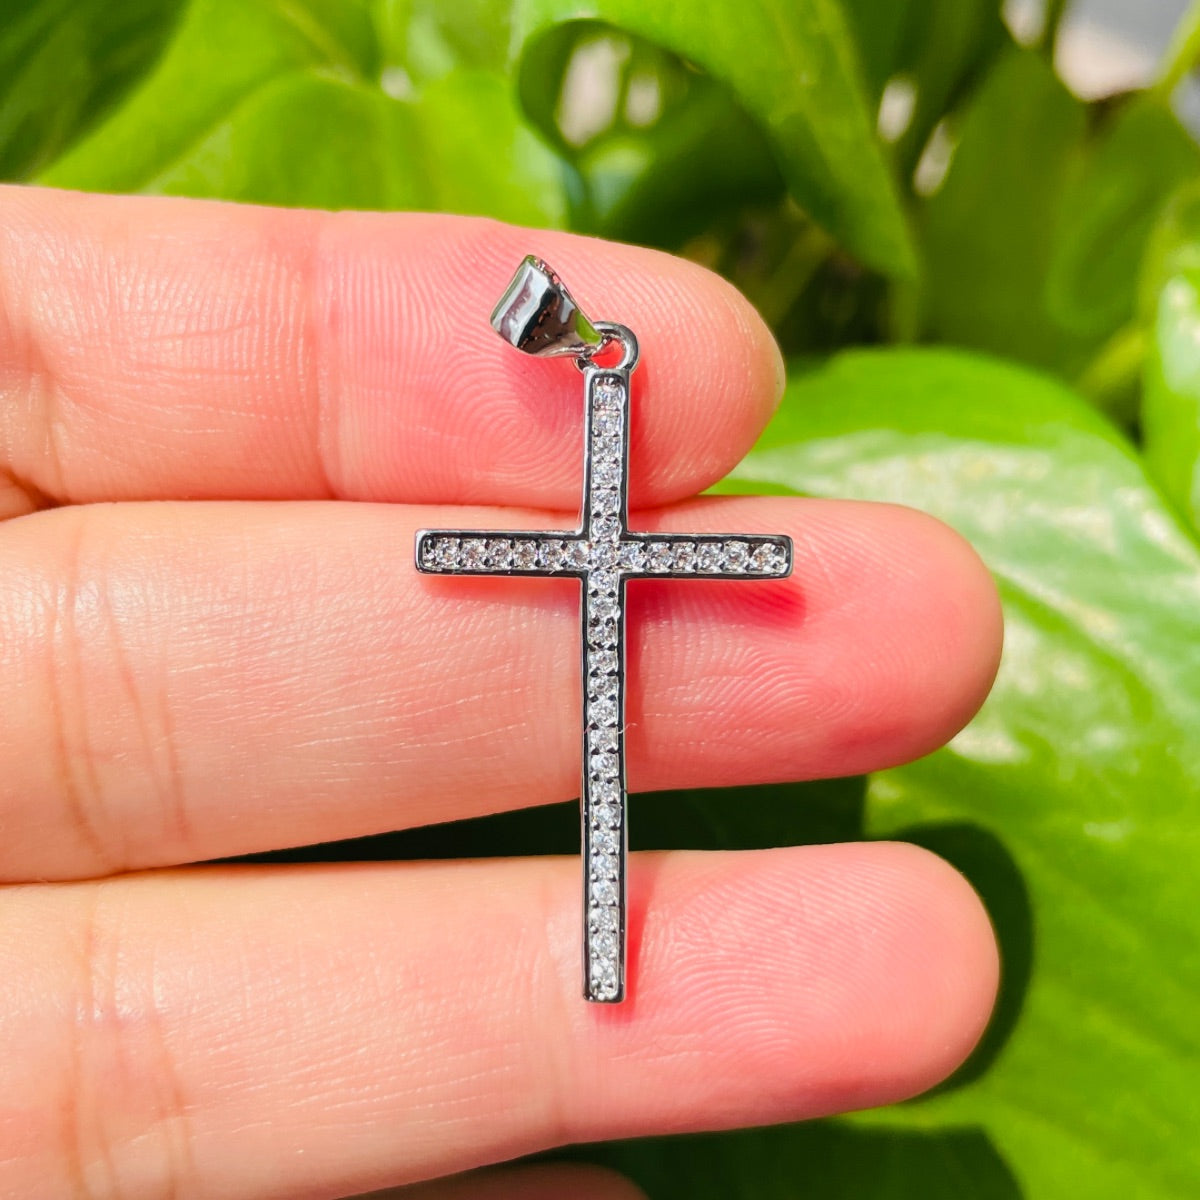 10pcs/lot Gold Silver Plated CZ Paved Cross Charms Silver CZ Paved Charms Crosses New Charms Arrivals Charms Beads Beyond